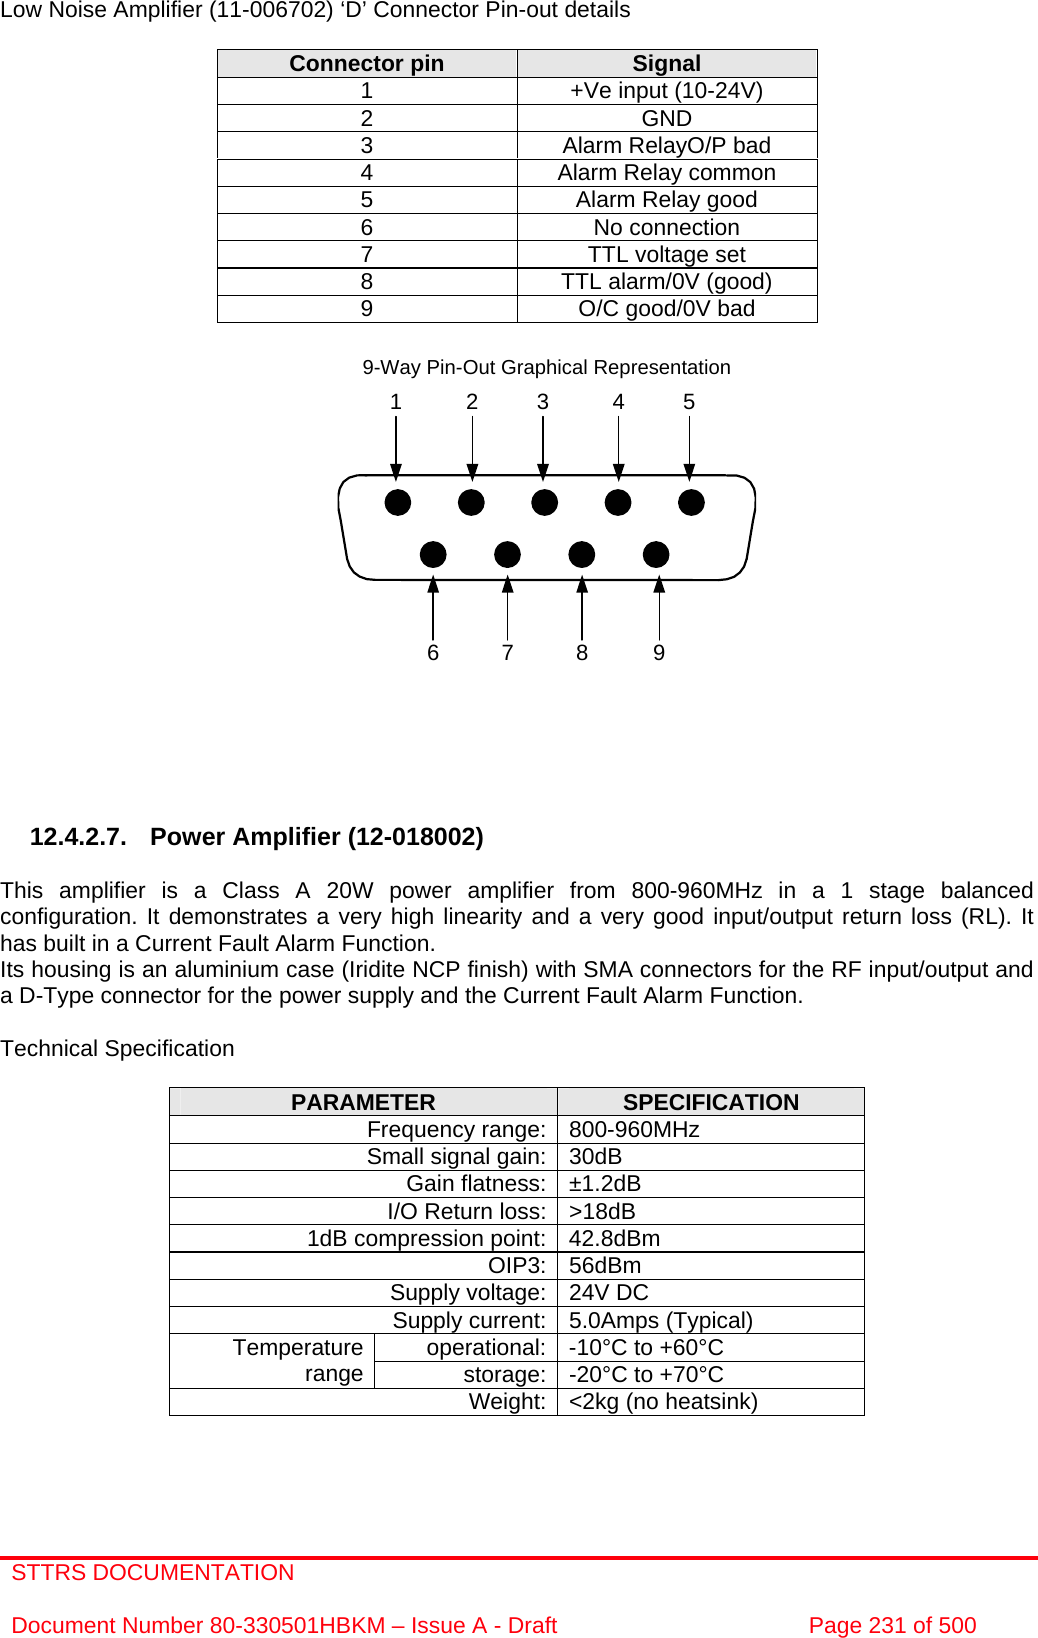 STTRS DOCUMENTATION  Document Number 80-330501HBKM – Issue A - Draft  Page 231 of 500  7 8 961 2 3 4 59-Way Pin-Out Graphical Representation Low Noise Amplifier (11-006702) ‘D’ Connector Pin-out details  Connector pin  Signal 1  +Ve input (10-24V) 2 GND 3  Alarm RelayO/P bad 4  Alarm Relay common 5  Alarm Relay good 6 No connection 7  TTL voltage set 8  TTL alarm/0V (good) 9  O/C good/0V bad                    12.4.2.7.  Power Amplifier (12-018002)  This amplifier is a Class A 20W power amplifier from 800-960MHz in a 1 stage balanced configuration. It demonstrates a very high linearity and a very good input/output return loss (RL). It has built in a Current Fault Alarm Function. Its housing is an aluminium case (Iridite NCP finish) with SMA connectors for the RF input/output and a D-Type connector for the power supply and the Current Fault Alarm Function.  Technical Specification  PARAMETER  SPECIFICATION Frequency range: 800-960MHz Small signal gain: 30dB Gain flatness: ±1.2dB I/O Return loss: &gt;18dB 1dB compression point: 42.8dBm OIP3: 56dBm Supply voltage: 24V DC Supply current: 5.0Amps (Typical) operational: -10°C to +60°C Temperature range  storage: -20°C to +70°C Weight: &lt;2kg (no heatsink)  